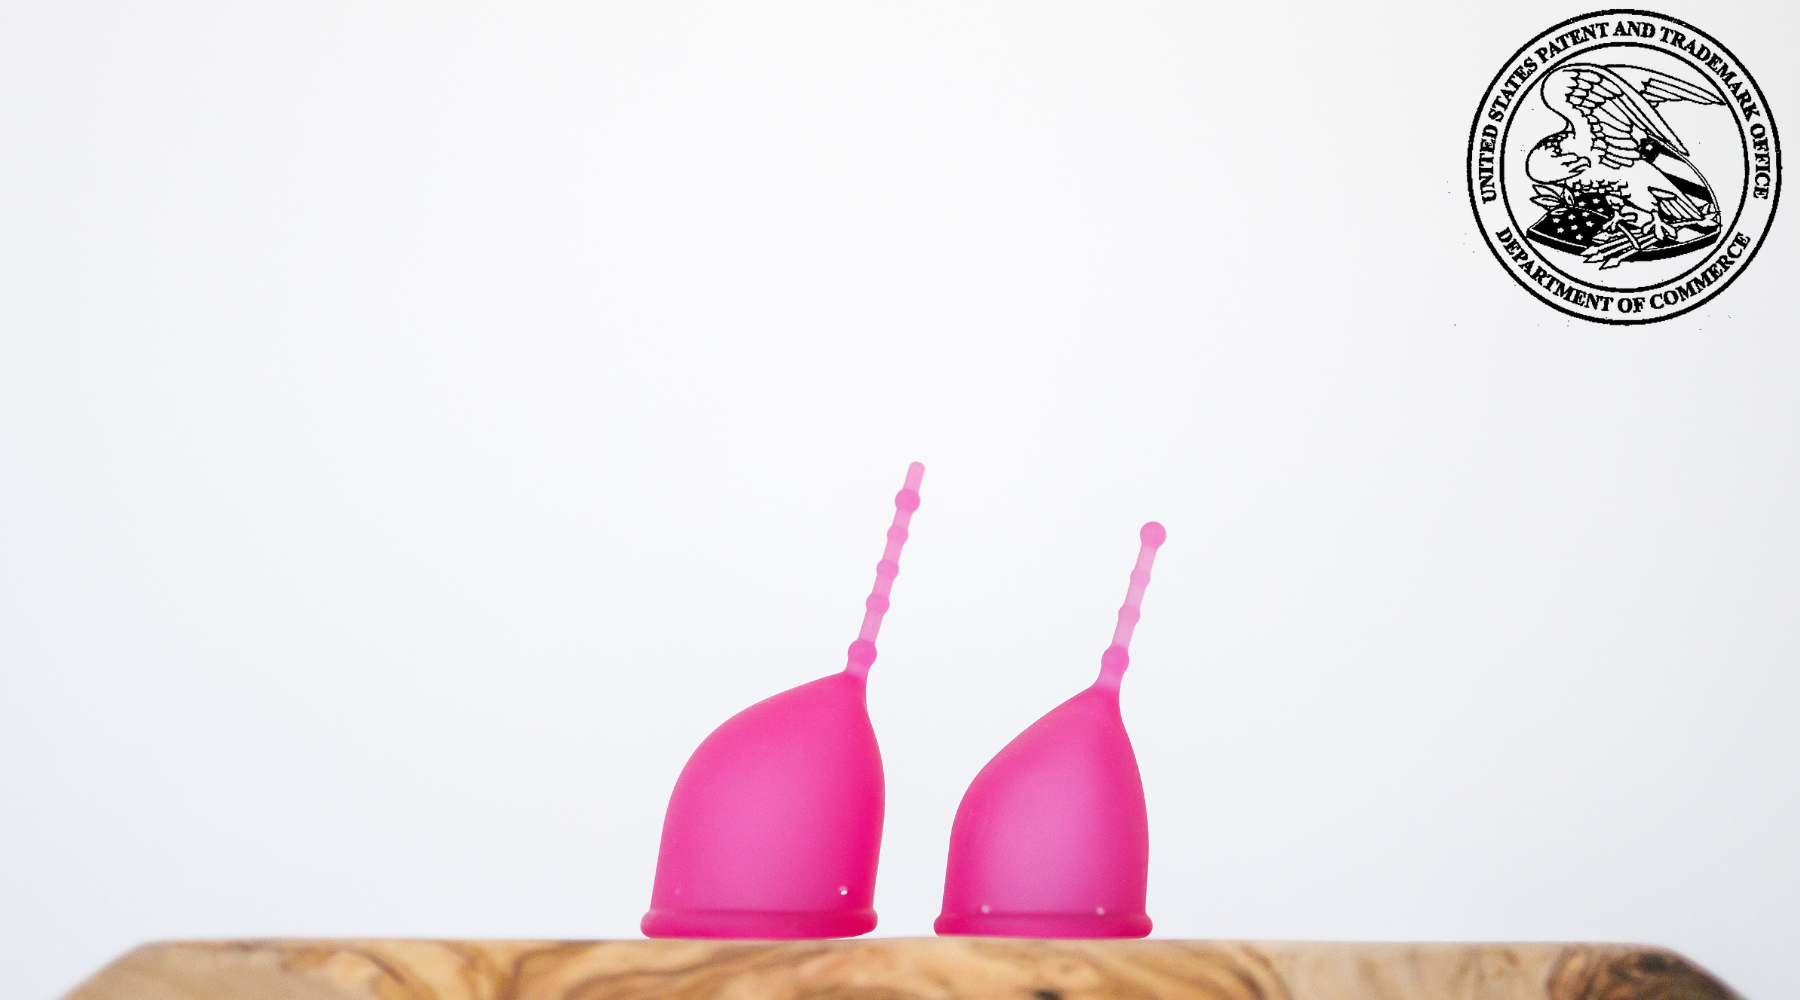 Kind Cup menstrual cups shown in profile with U.S. Patent Office Seal